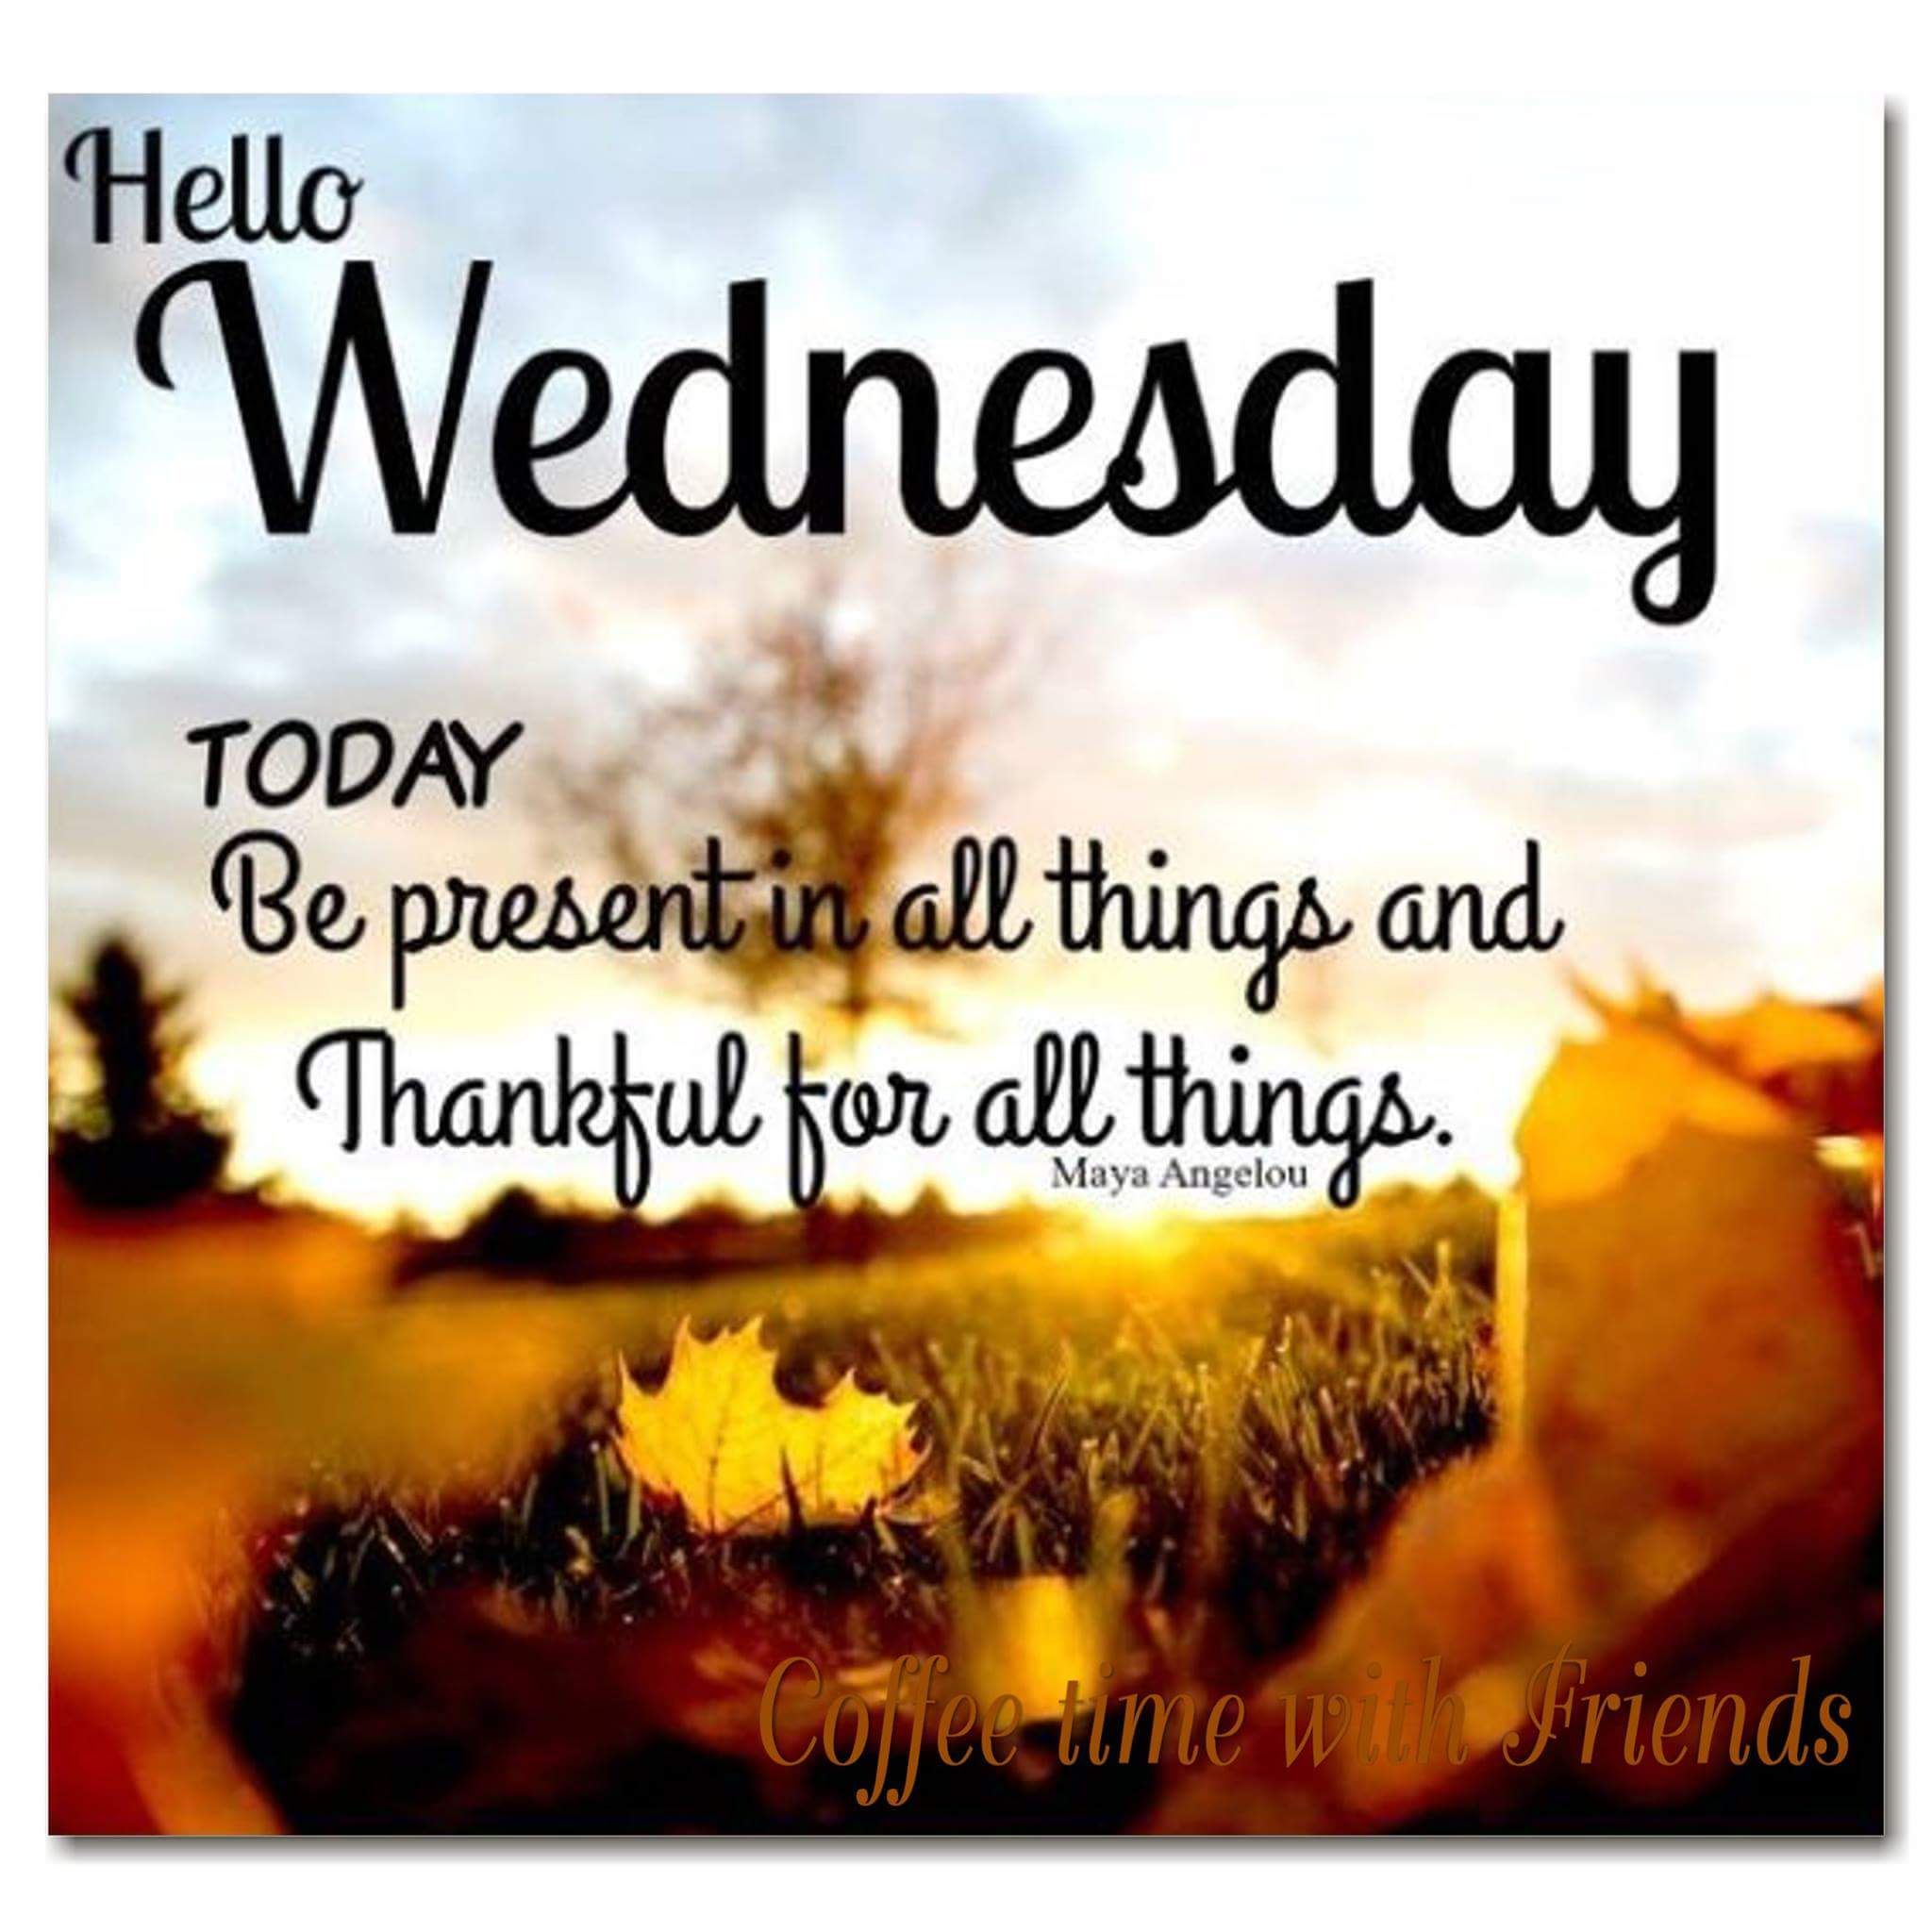 Hello Wednesday Quotes And Image